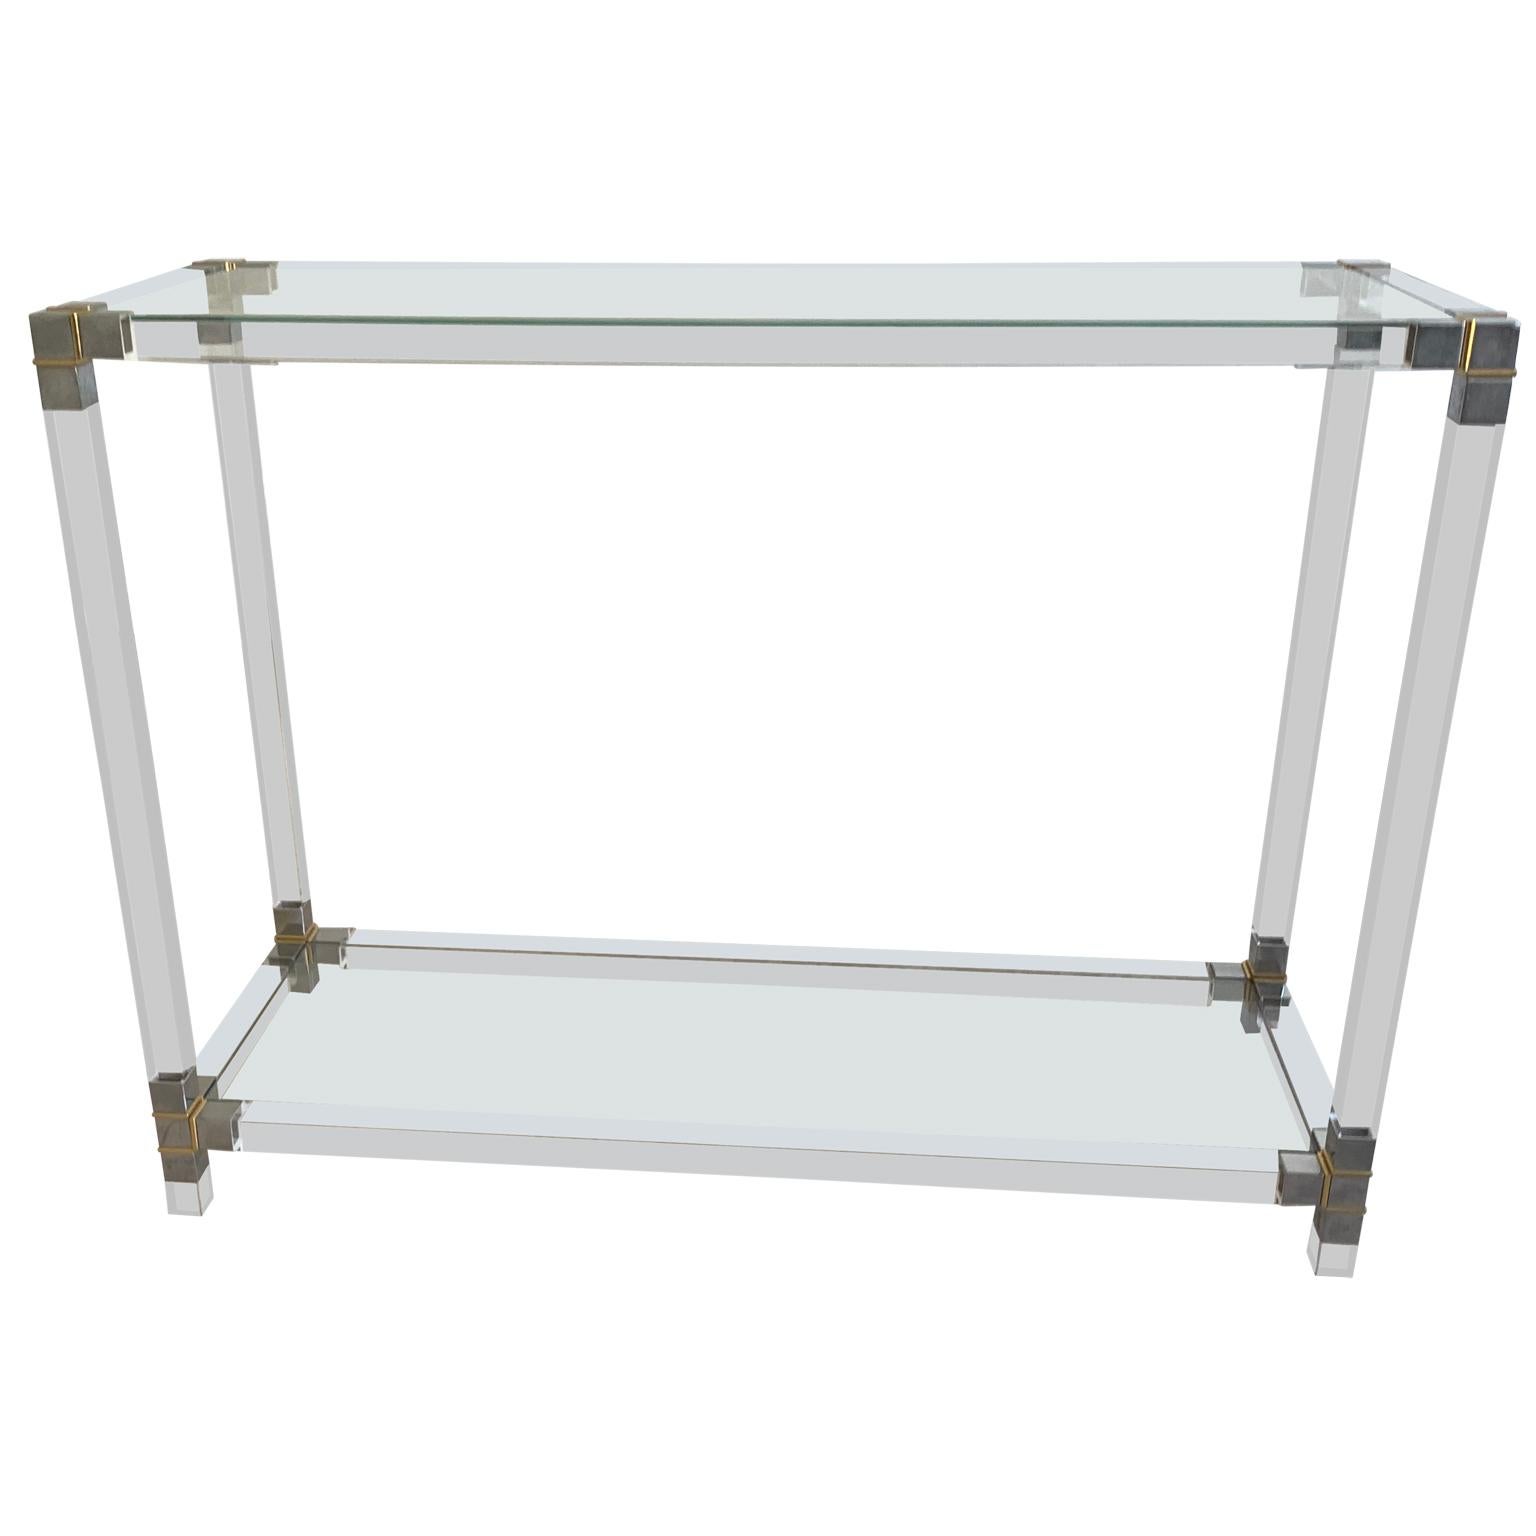 Narrow two-tier Mid-Century Modern glass-top console table in Lucite, polished nickel and brass

Complimentary 3-5 week front door delivery available to most of to London, UK.
          